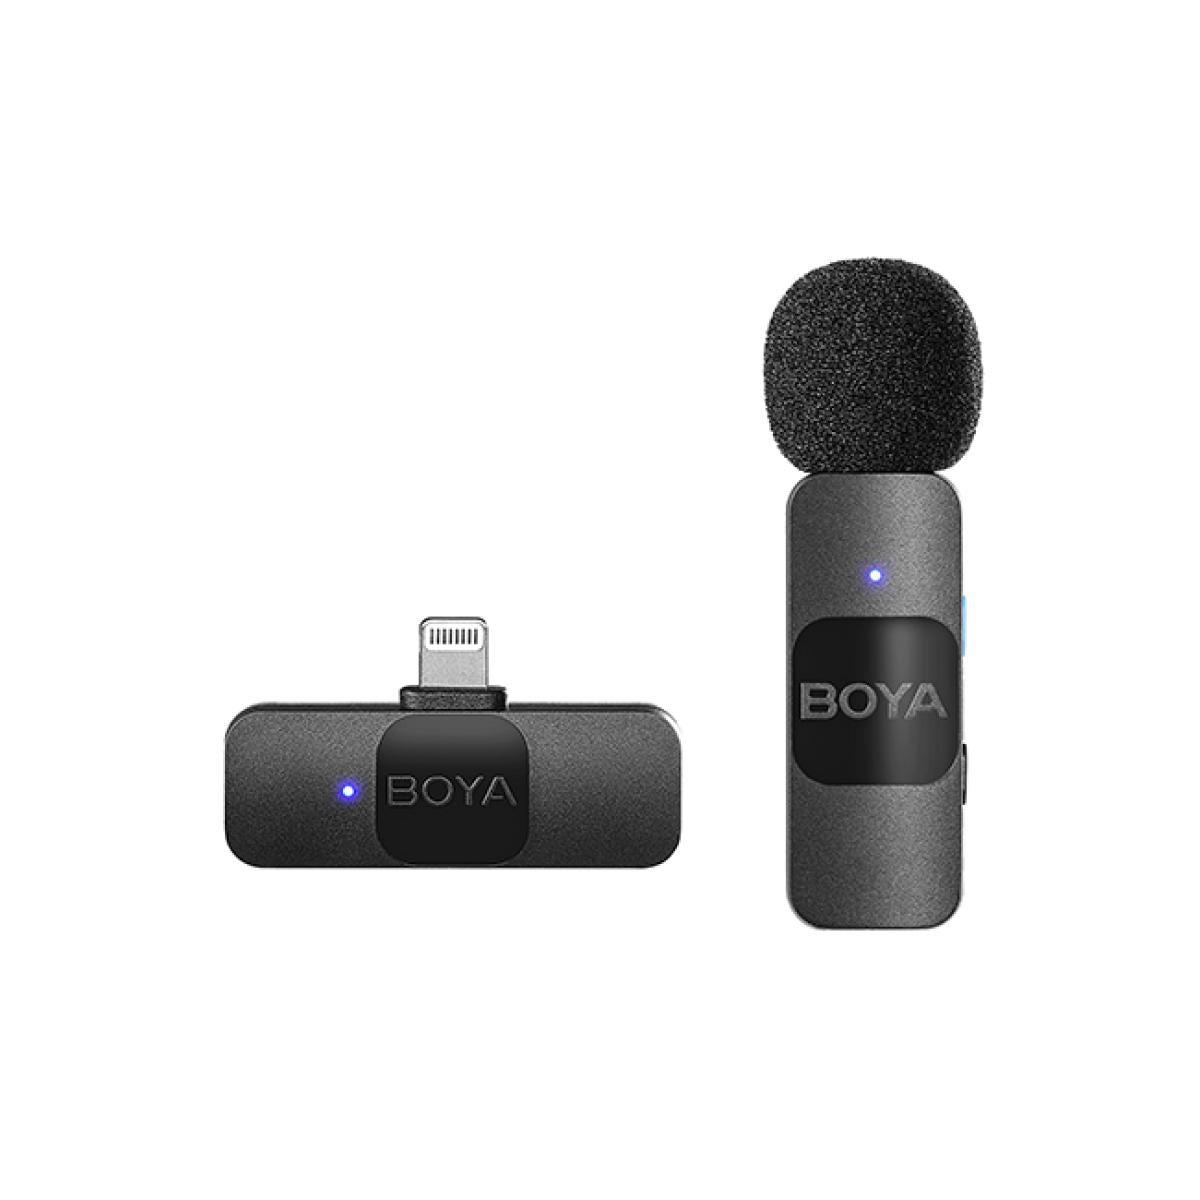 BOYA Ultracompact 2.4GHz iPhone Wireless Microphone System (One Mic) - Black